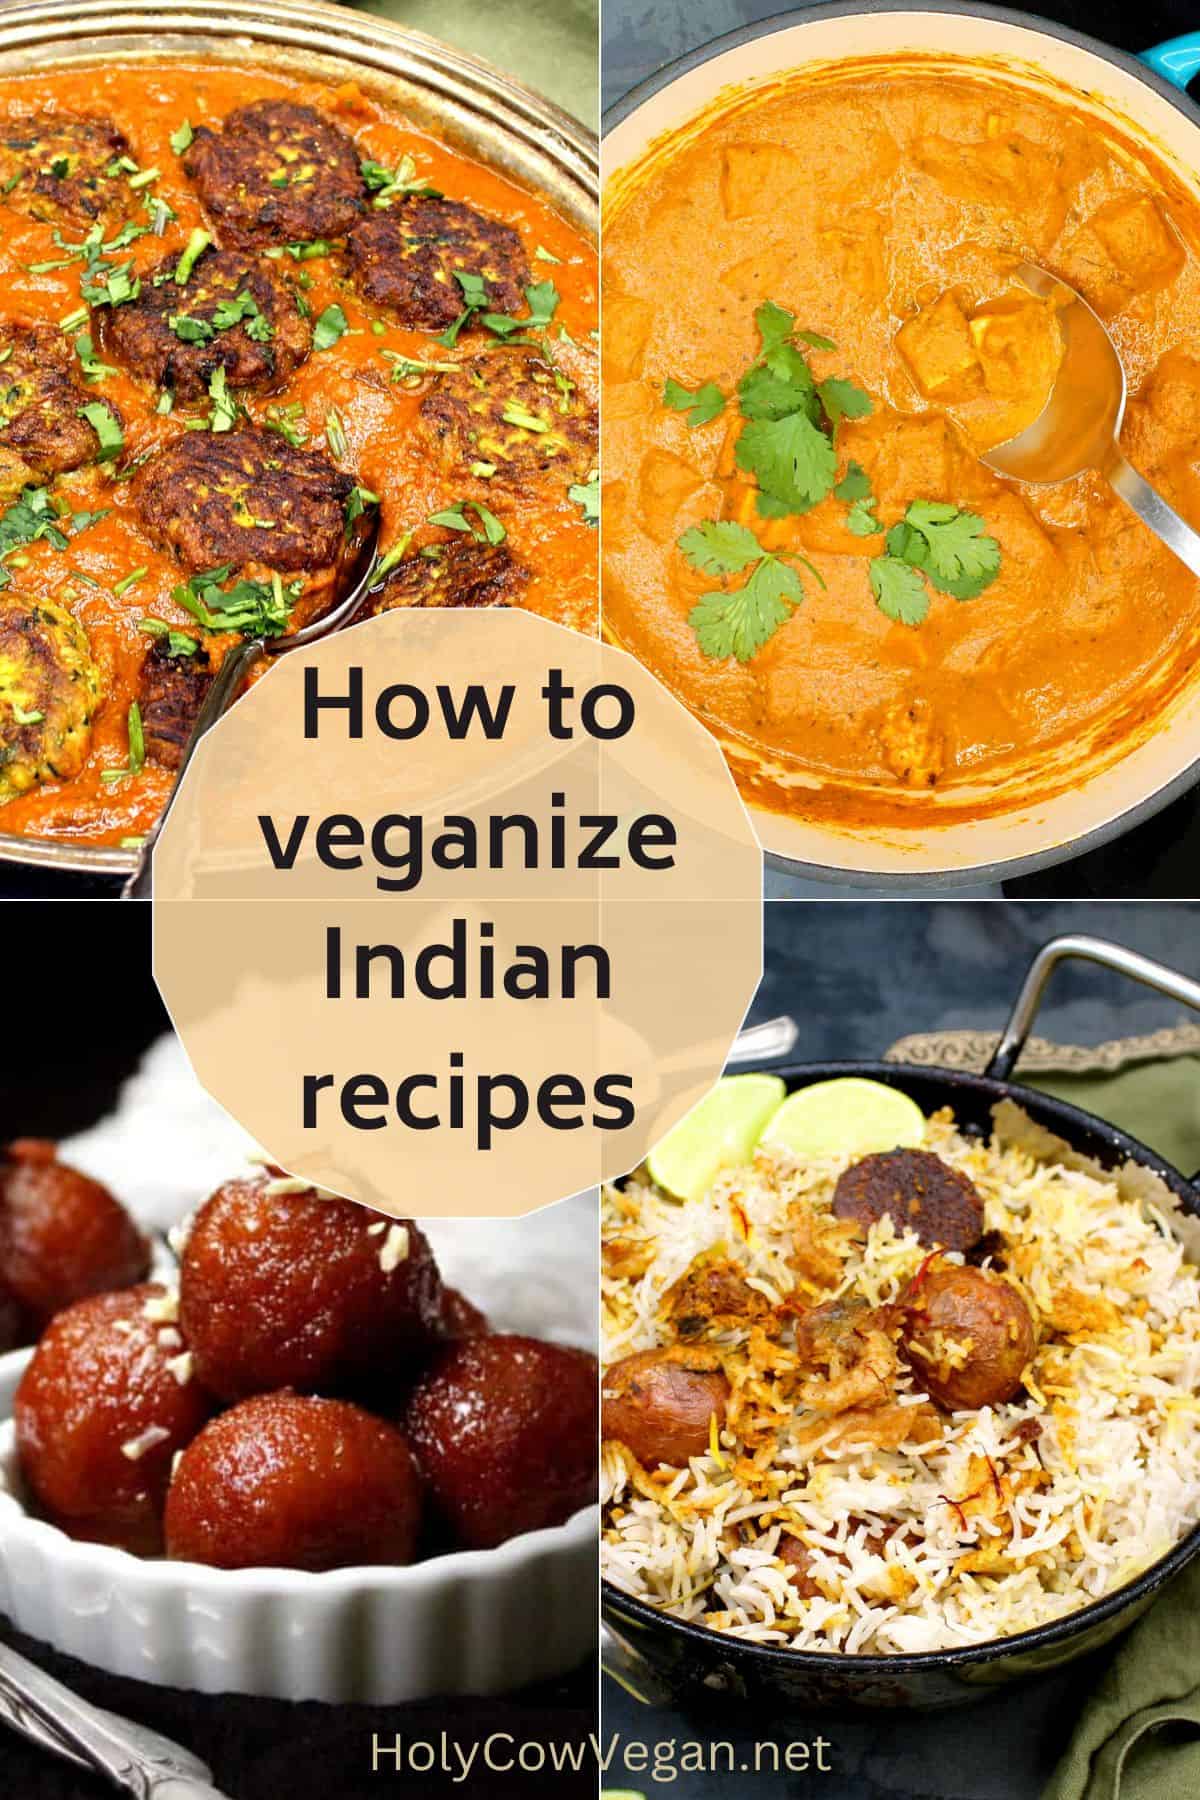 Images of four indian recipes with text that says "how to veganize Indian food."